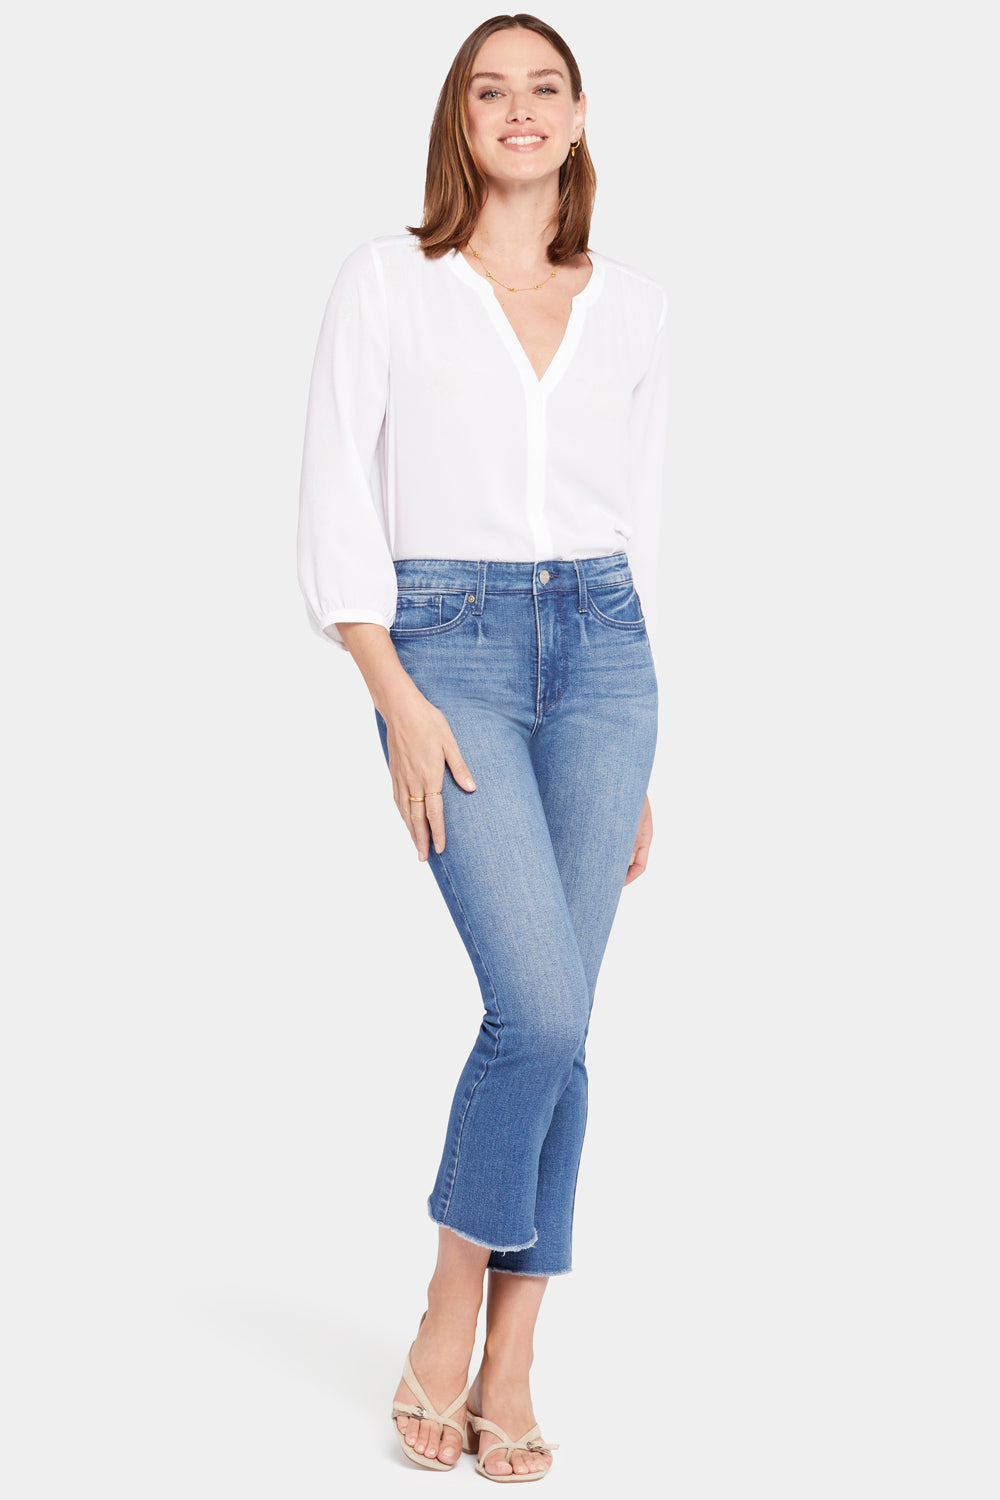 Slim Bootcut Ankle Jeans With High Rise And Frayed Hems - Heartland Blue |  NYDJ